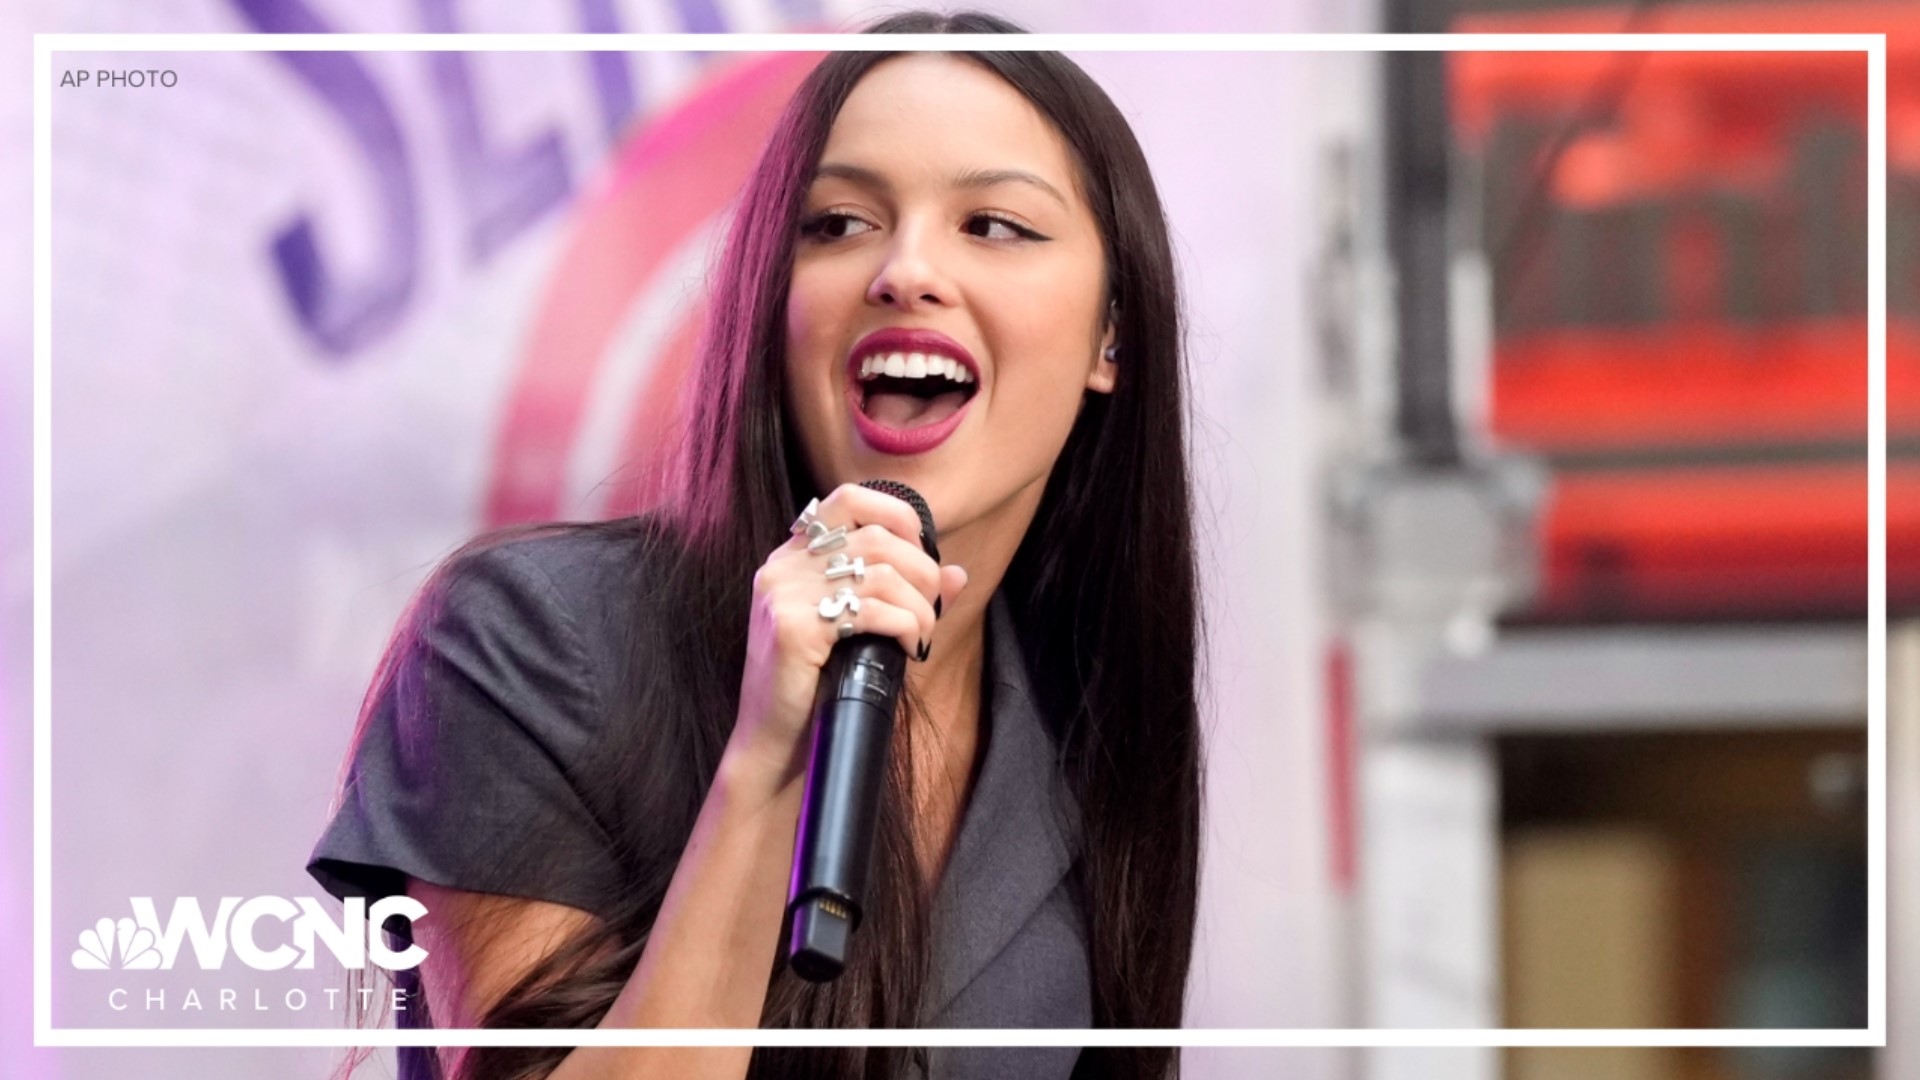 Olivia Rodrigo will stop in Charlotte during her newly announced "GUTS" tour to share her latest album with fans in North Carolina.